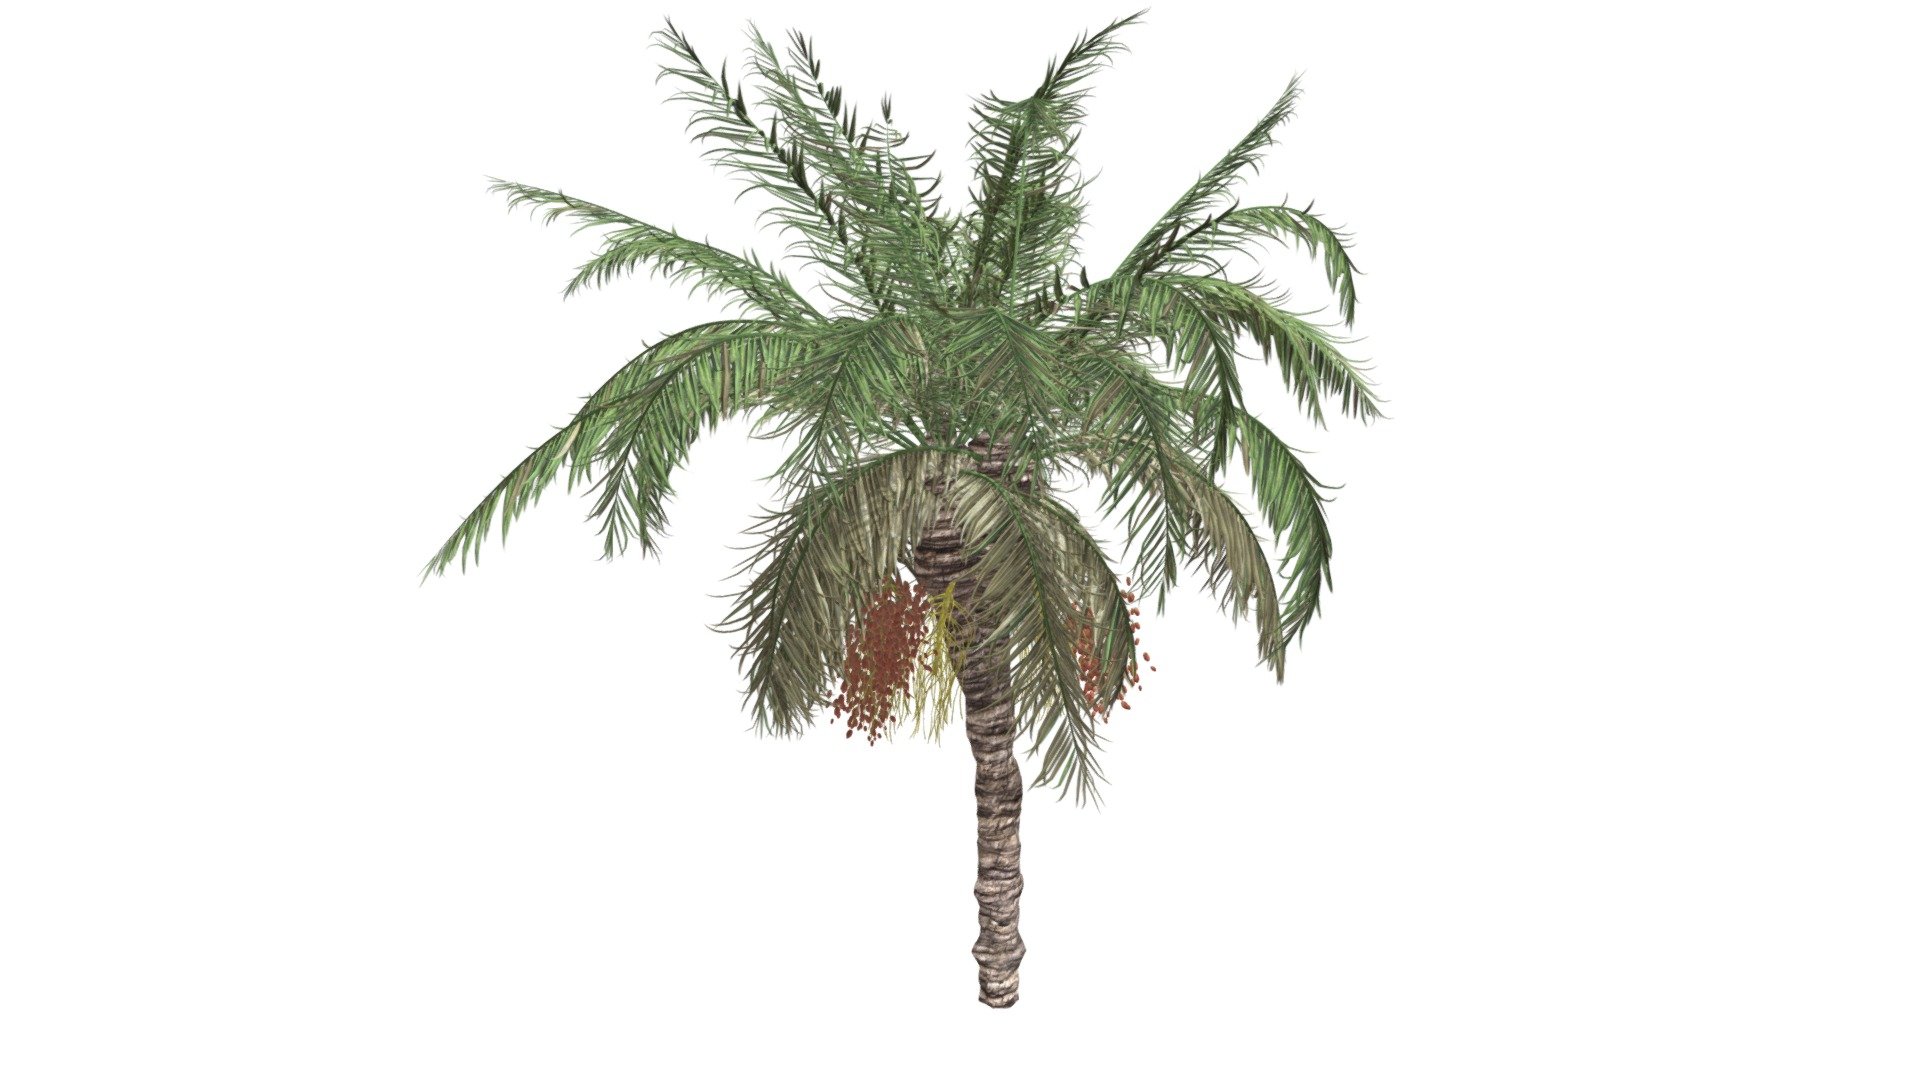 This 3D model of the Date Palm Tree is a highly detailed and photorealistic option suitable for architectural, landscaping, and video game projects. The model is designed with carefully crafted textures that mimic the natural beauty of a real Date Palm Tree. Its versatility allows it to bring a touch of realism to any project, whether it's a small architectural rendering or a large-scale landscape design. Additionally, the model is optimized for performance and features efficient UV mapping. This photorealistic 3D model is the perfect solution for architects, landscapers, and game developers who want to enhance the visual experience of their project with a highly detailed, photorealistic Date Palm Tree 3d model